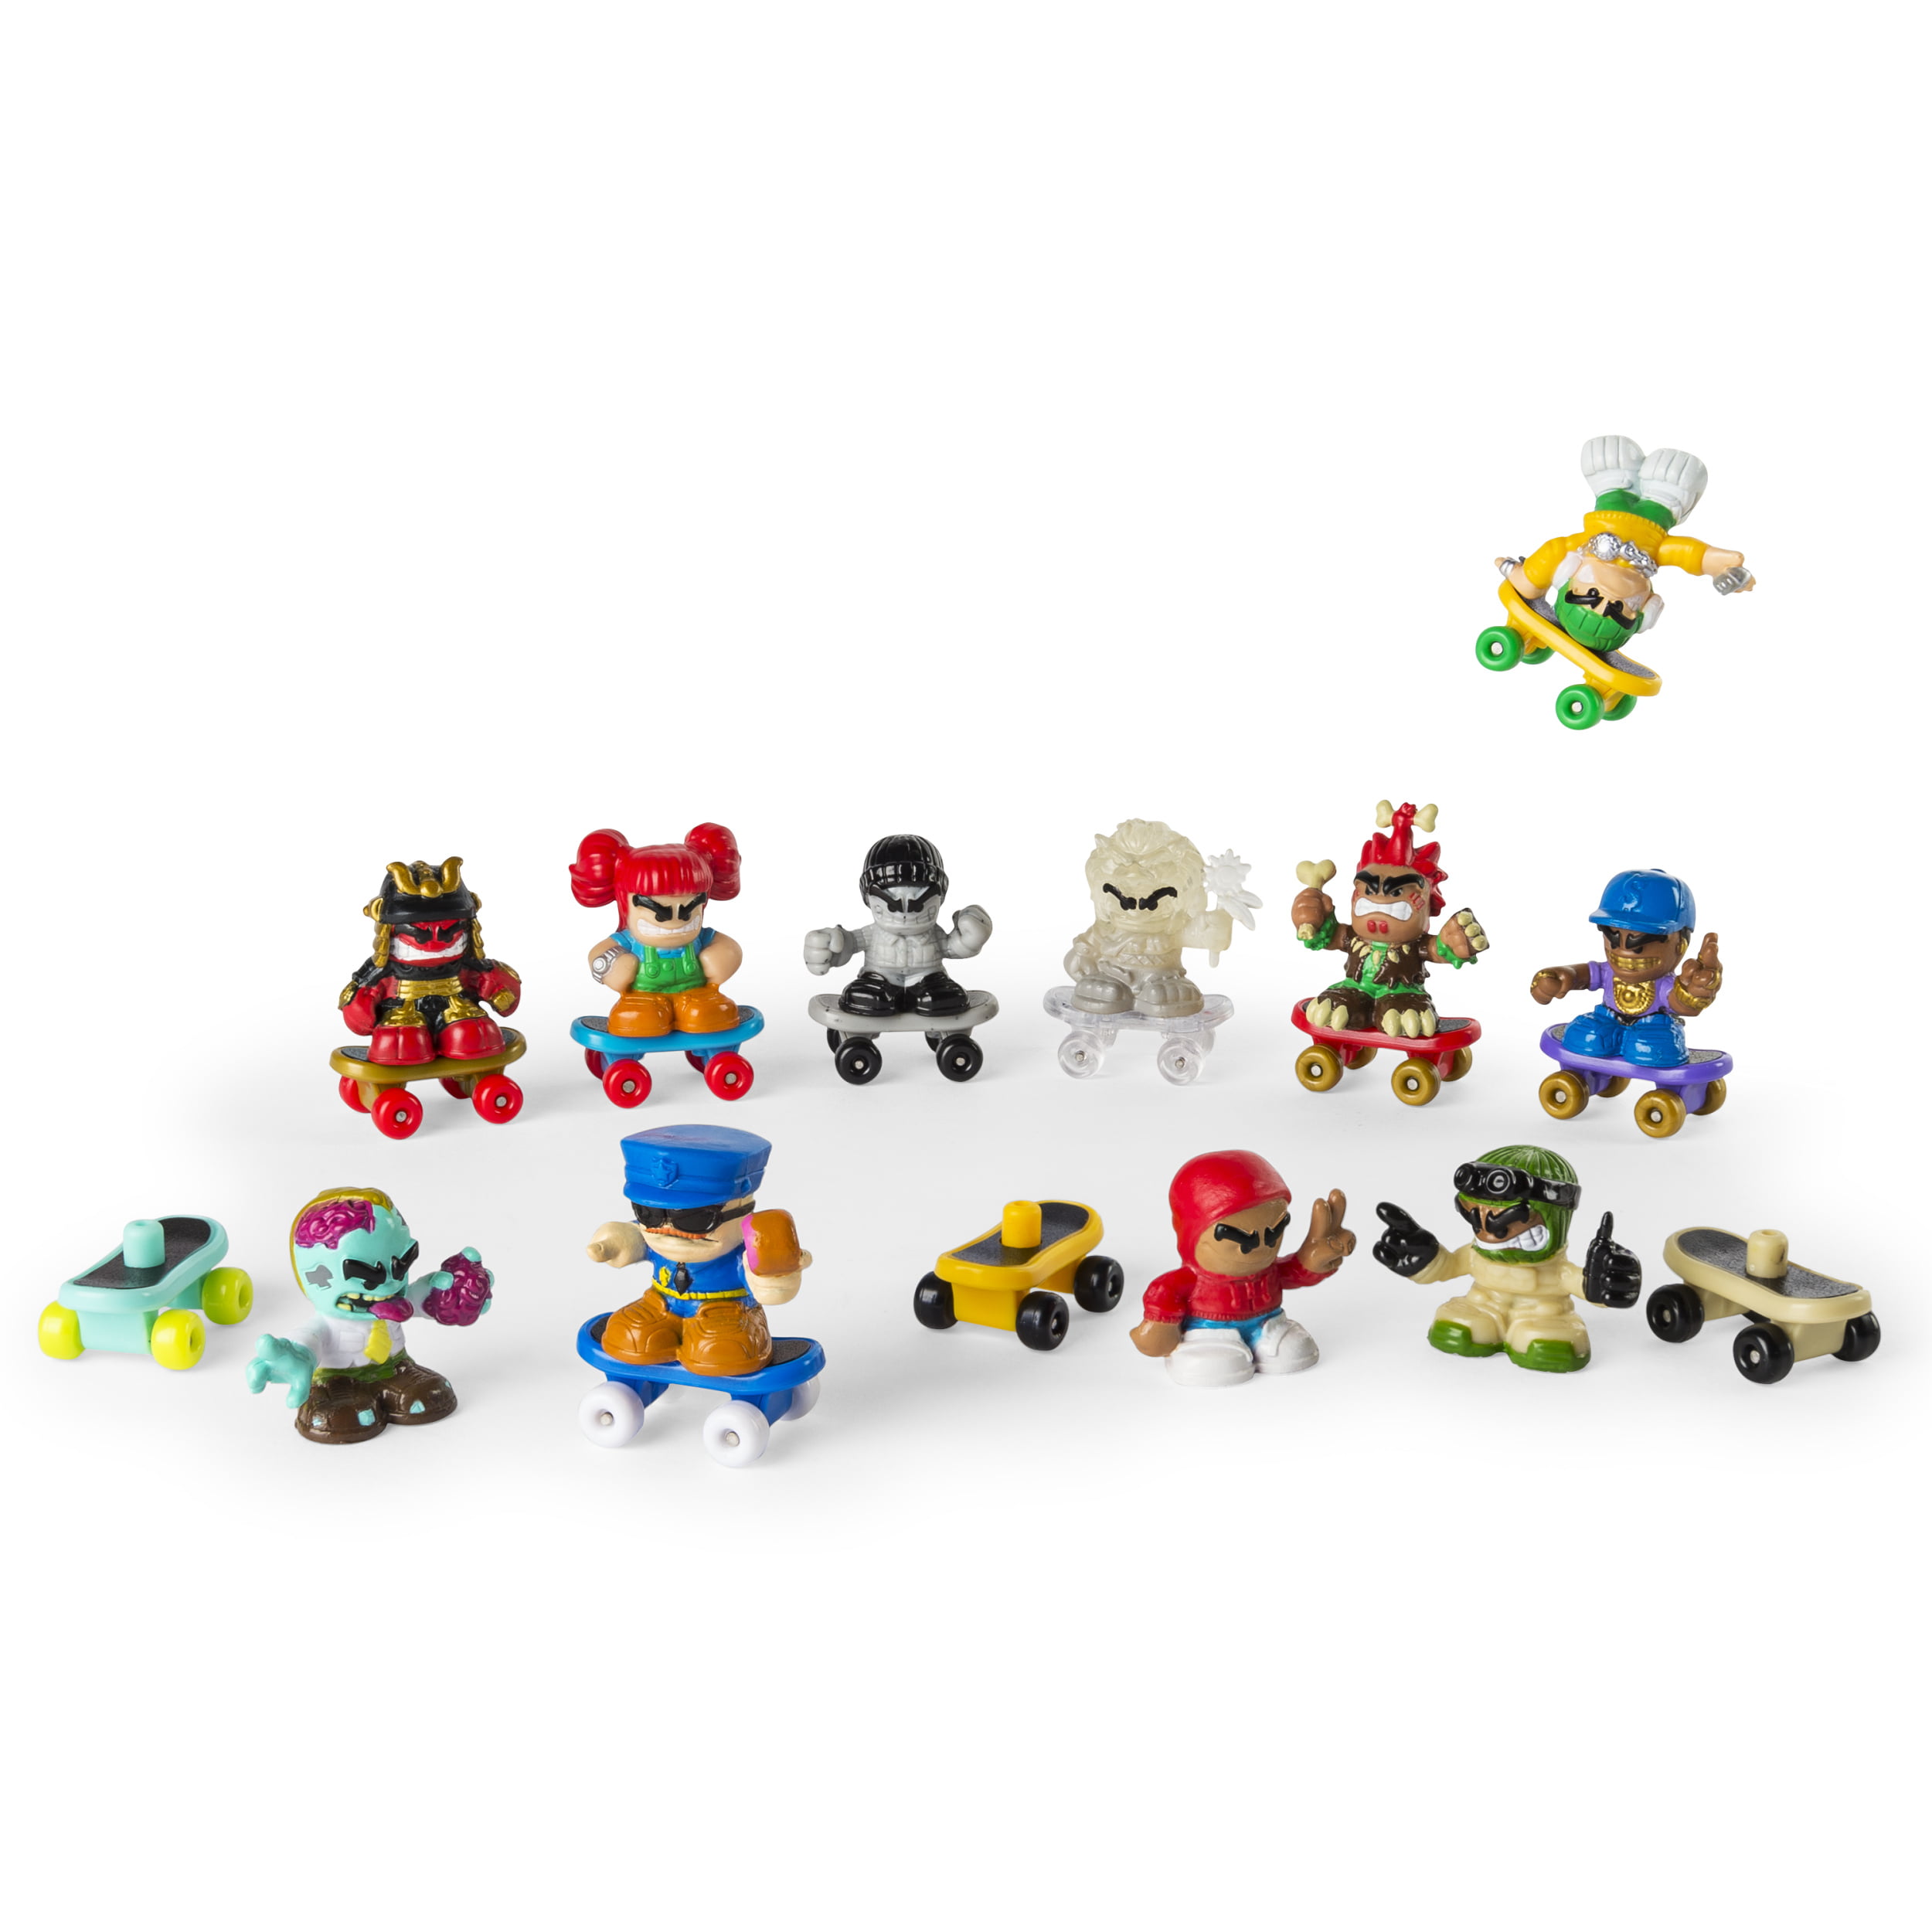 D Spin Master Tech Deck Dudes Series 1 Figures 4 Pack figs may vary in packs 